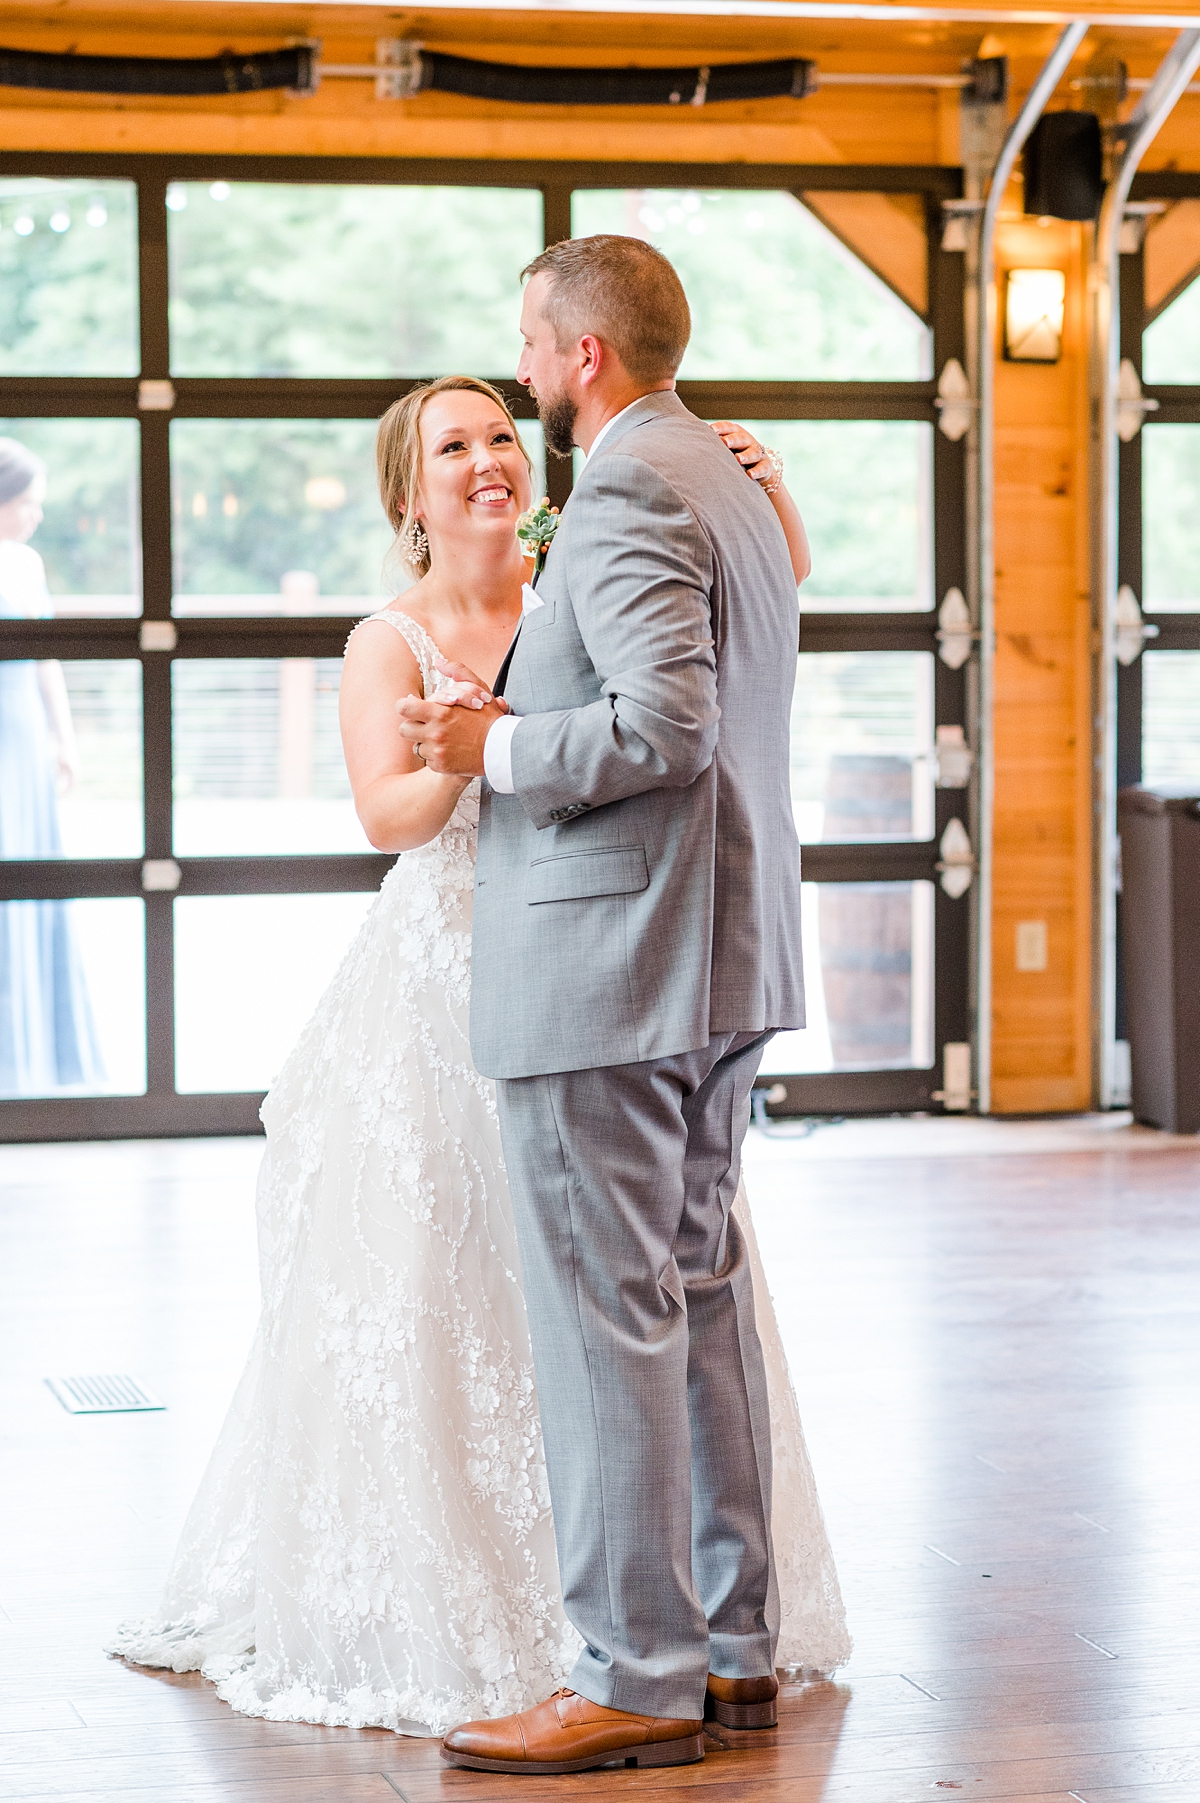 First Dance During Smoky Mountain Wedding Reception at The Magnolia Venue in Tennessee. Wedding Photography by Virginia Wedding Photographer Kailey Brianne Photography. 